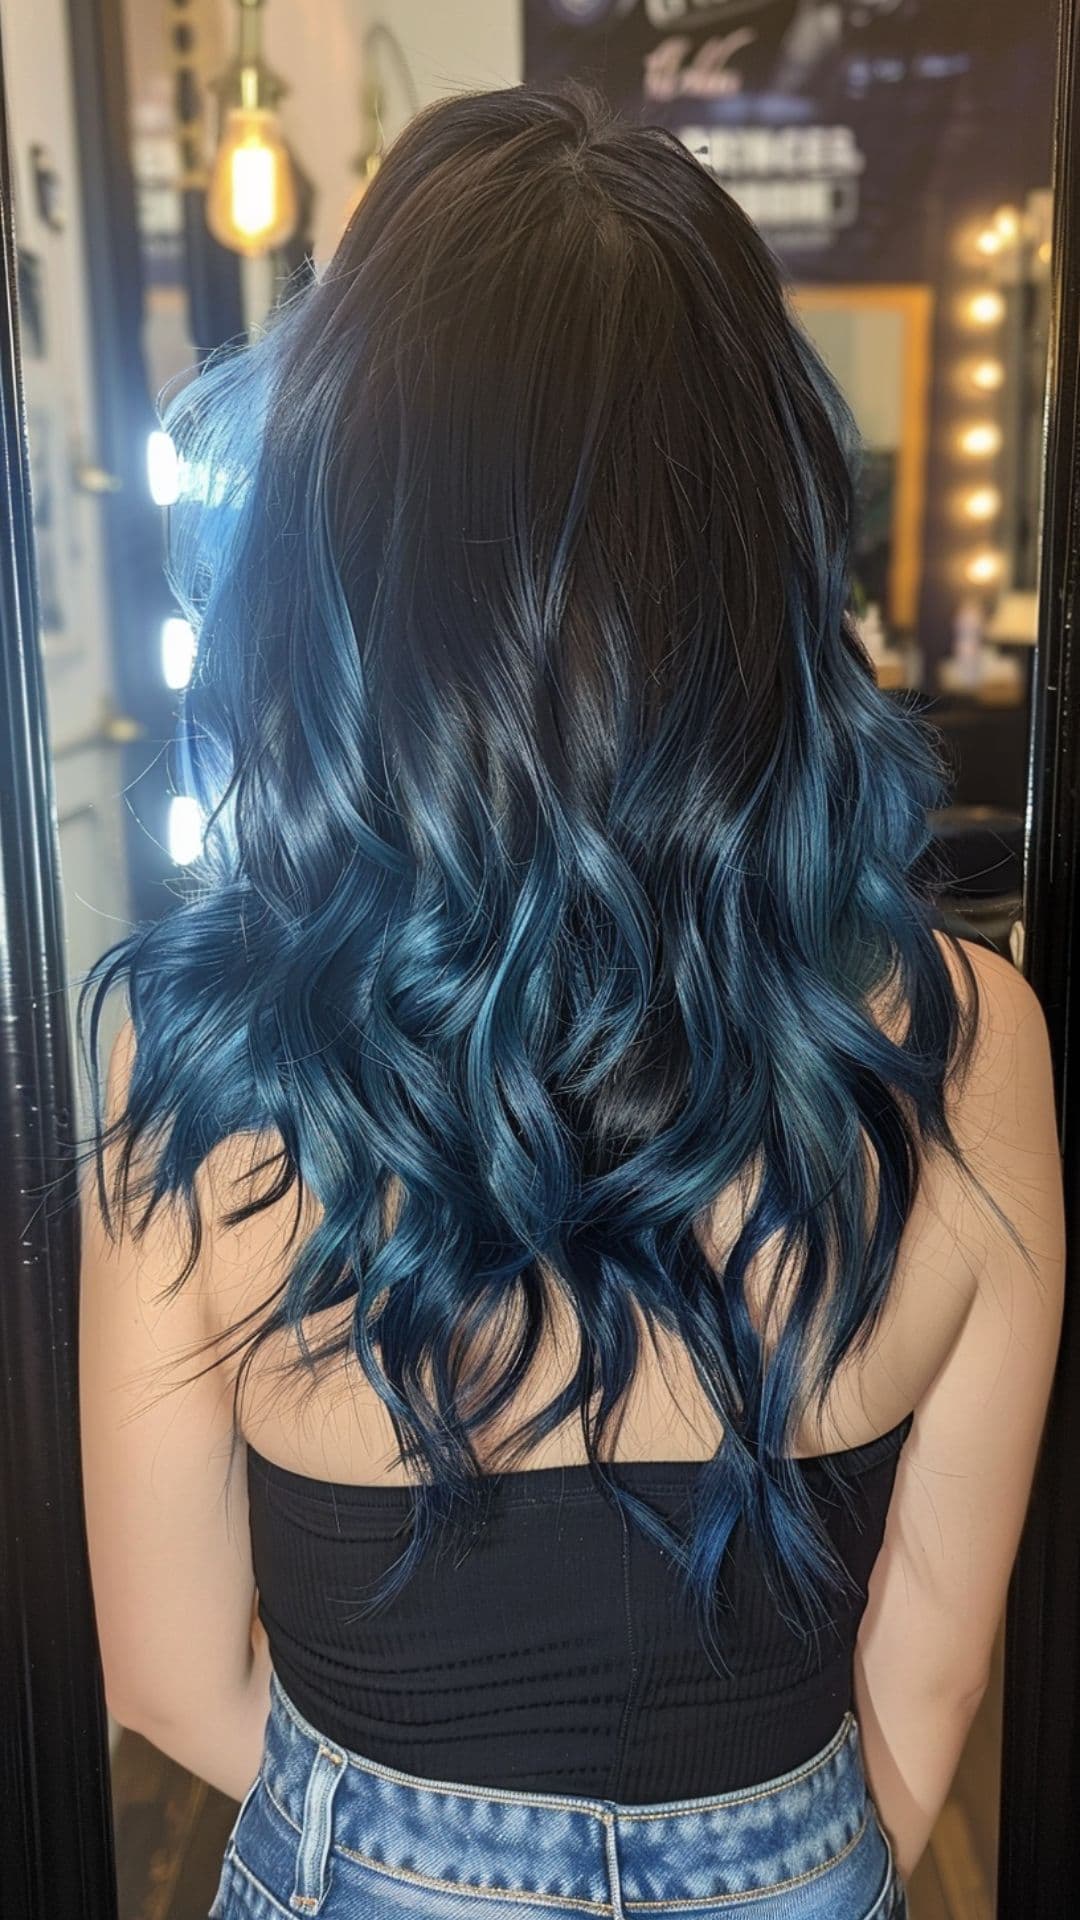 A woman modelling a black and blue hair.